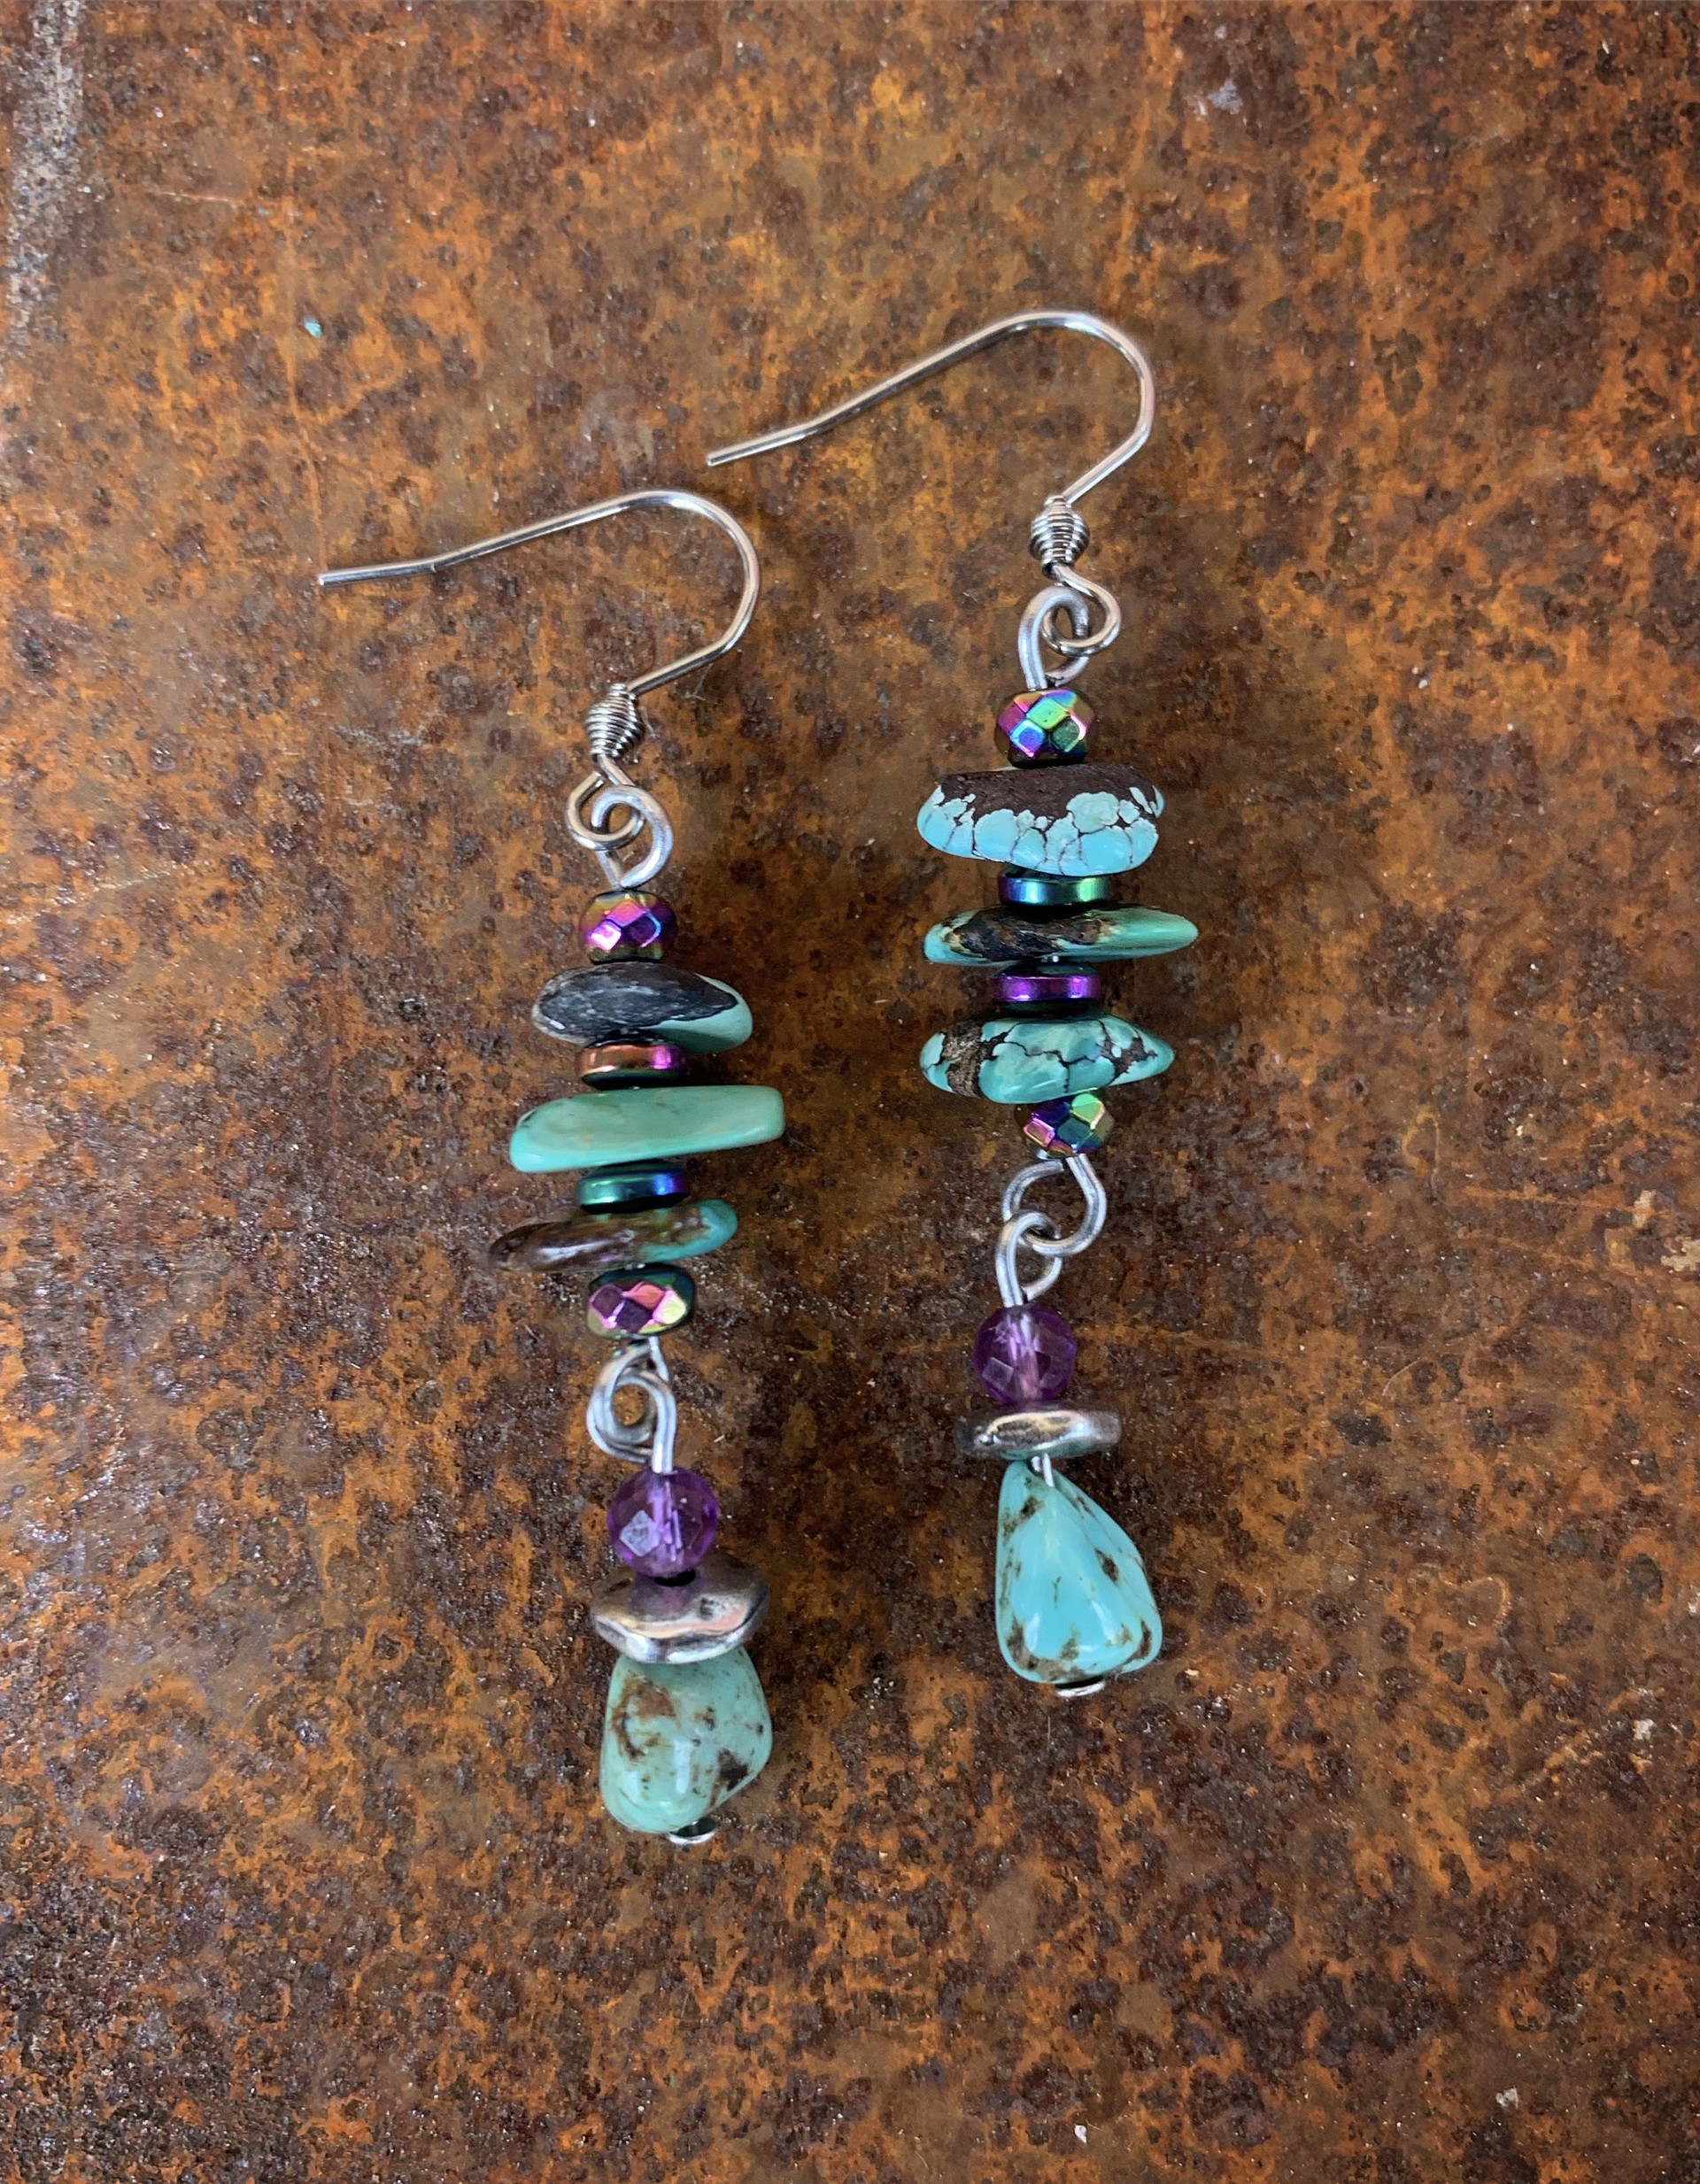 K760 Turquoise Earrings by Kelly Ormsby